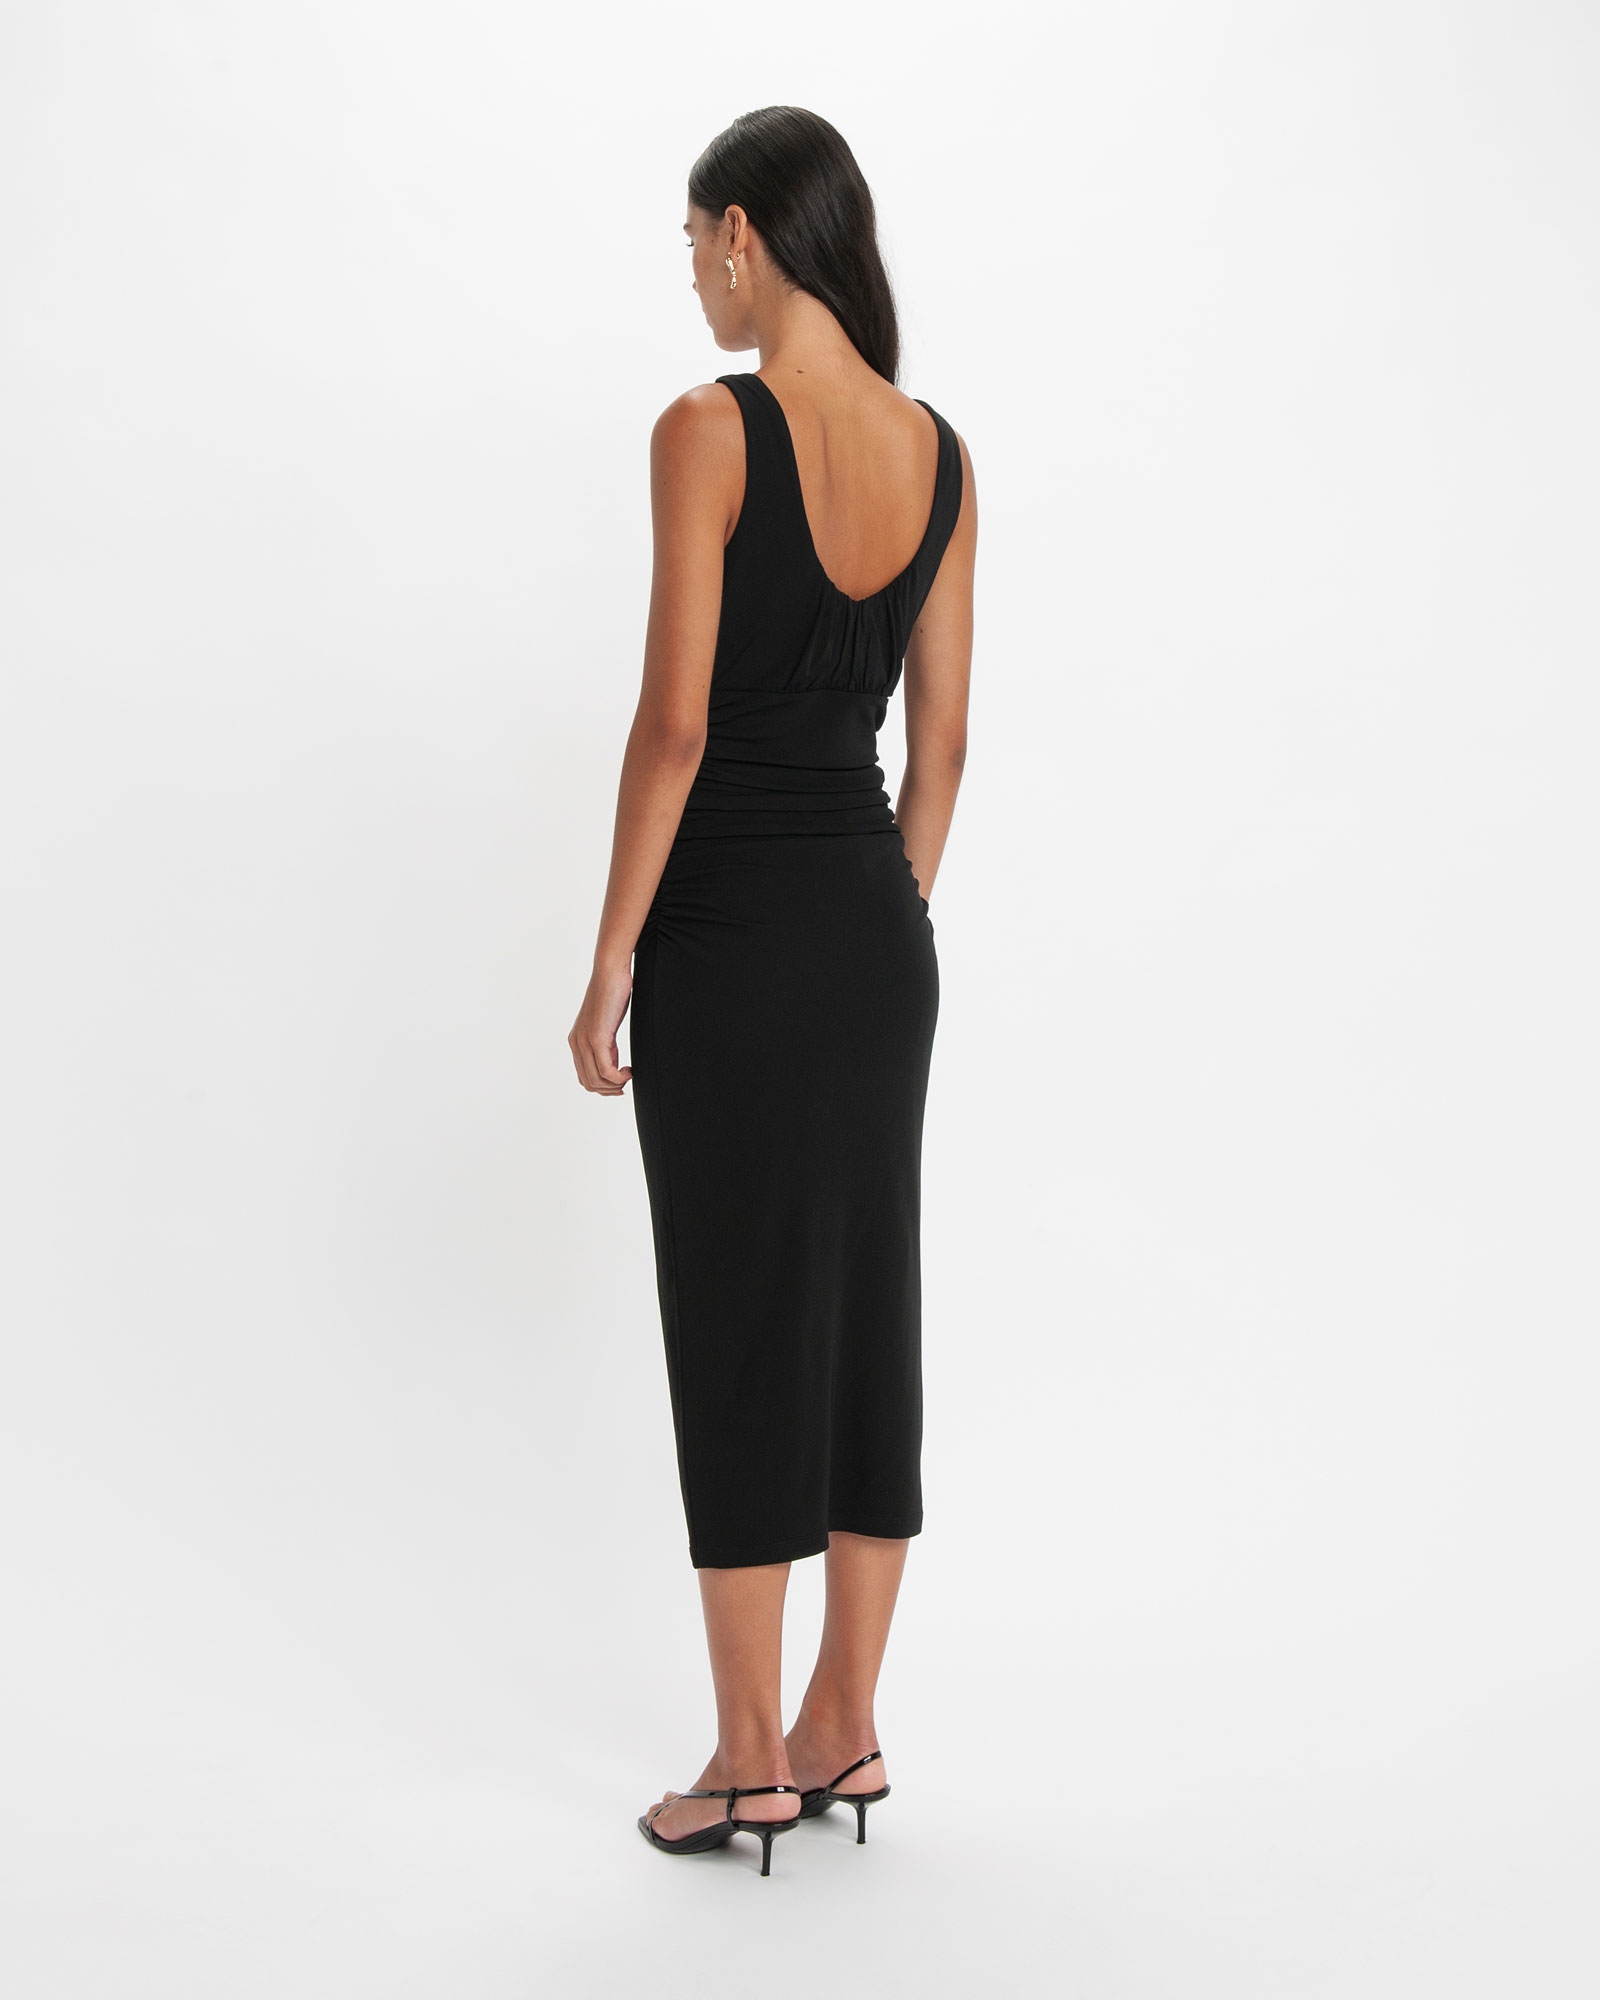 Ruched Jersey Midi Dress | Buy Dresses Online - Cue